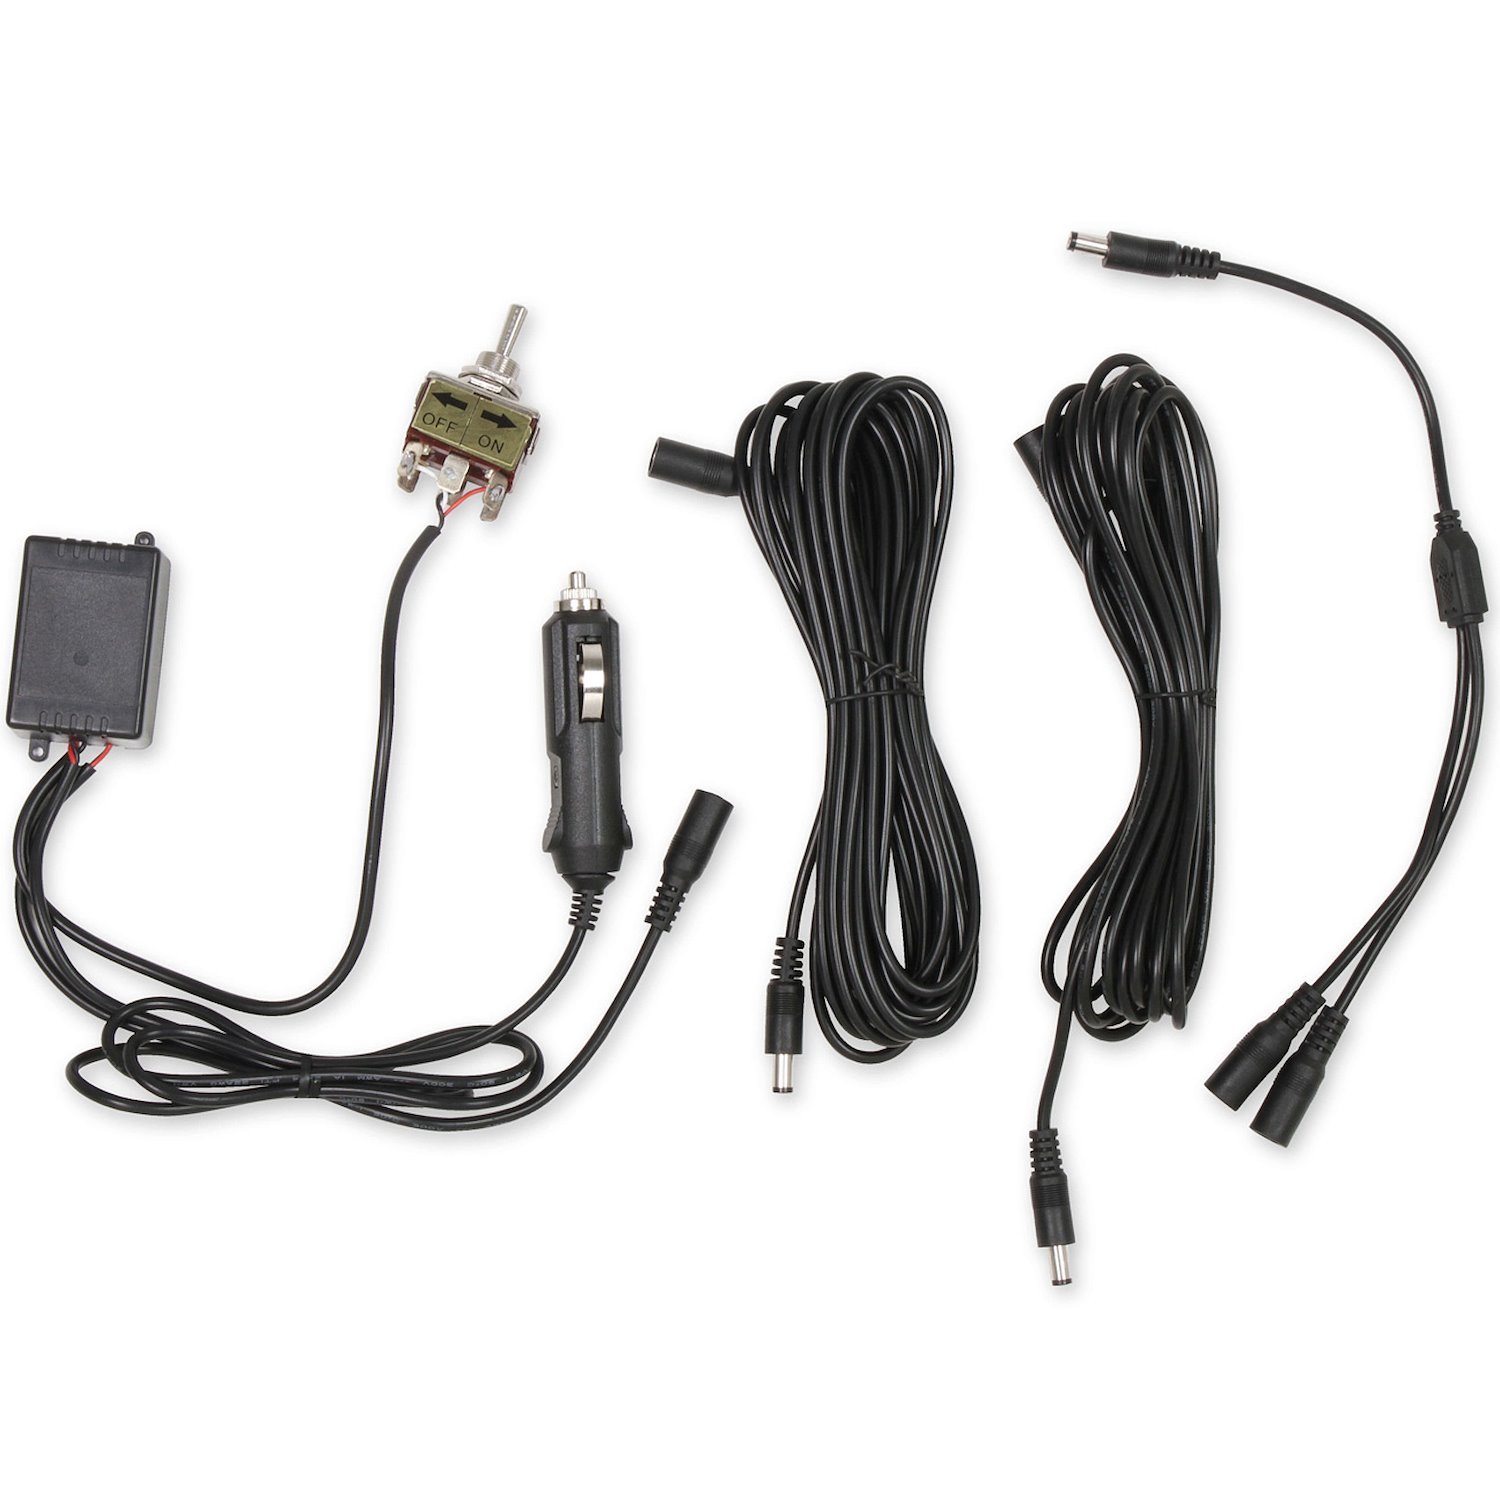 Street Tease Wiring Harness and Toggle Switch Kit